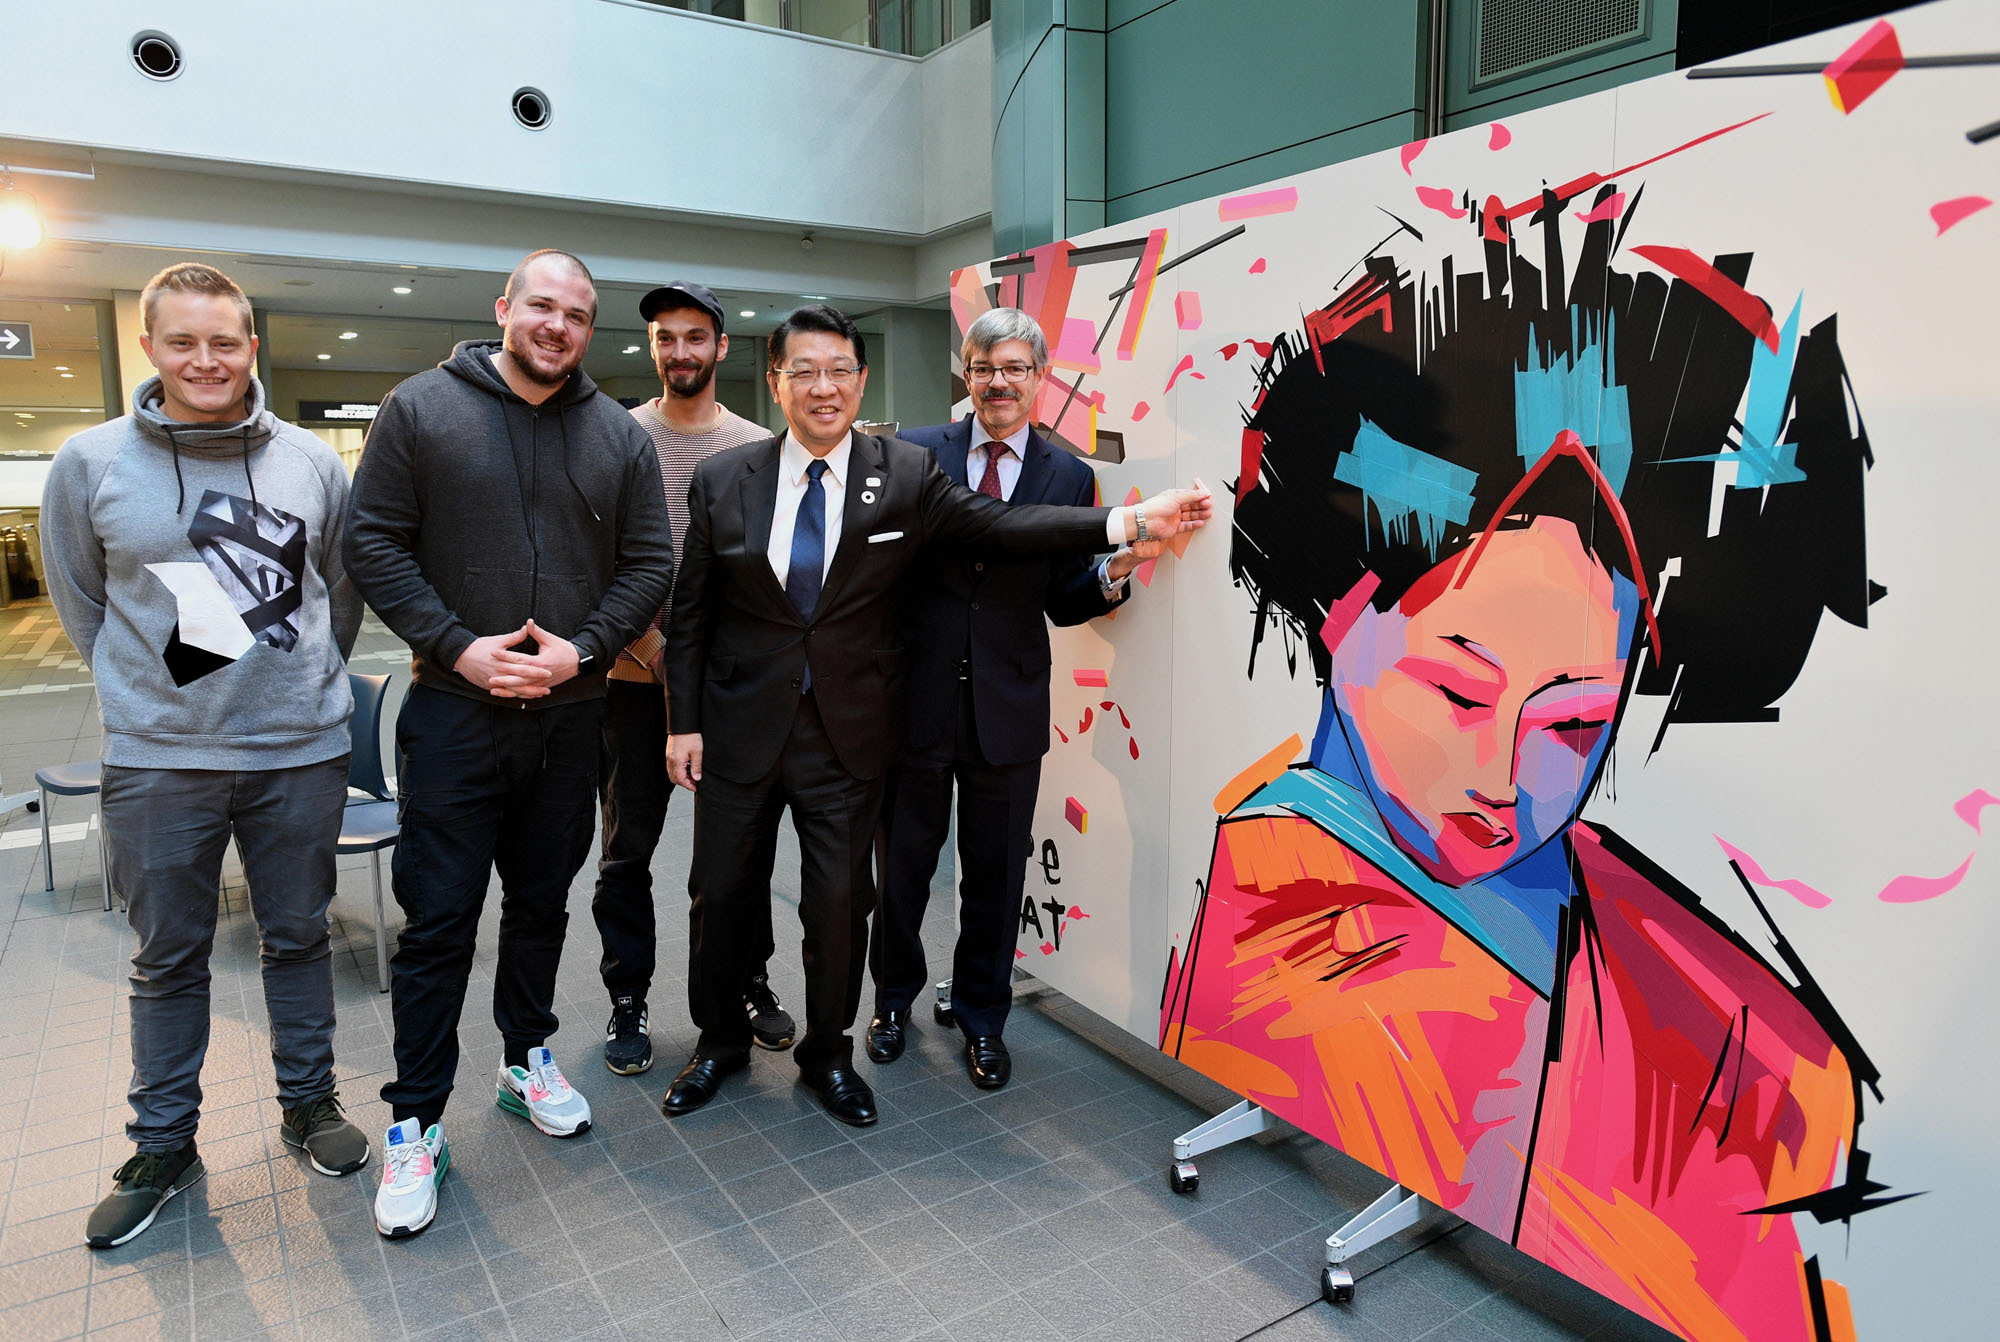 The Berlin-based street art group Tape That (first to third from left) poses with German Ambassador Hans Carl Freiherr von Werthern (right) and Bunkyo Ward Mayor Hironobu Narisawa at an opening ceremony debuting the group's artwork, made with adhesive tape, at the Bunkyo Civic Center in Tokyo. Tape That is in Japan to celebrate the 25th anniversary of sister city relations between Tokyo and Berlin. |  YOSHIAKI MIURA